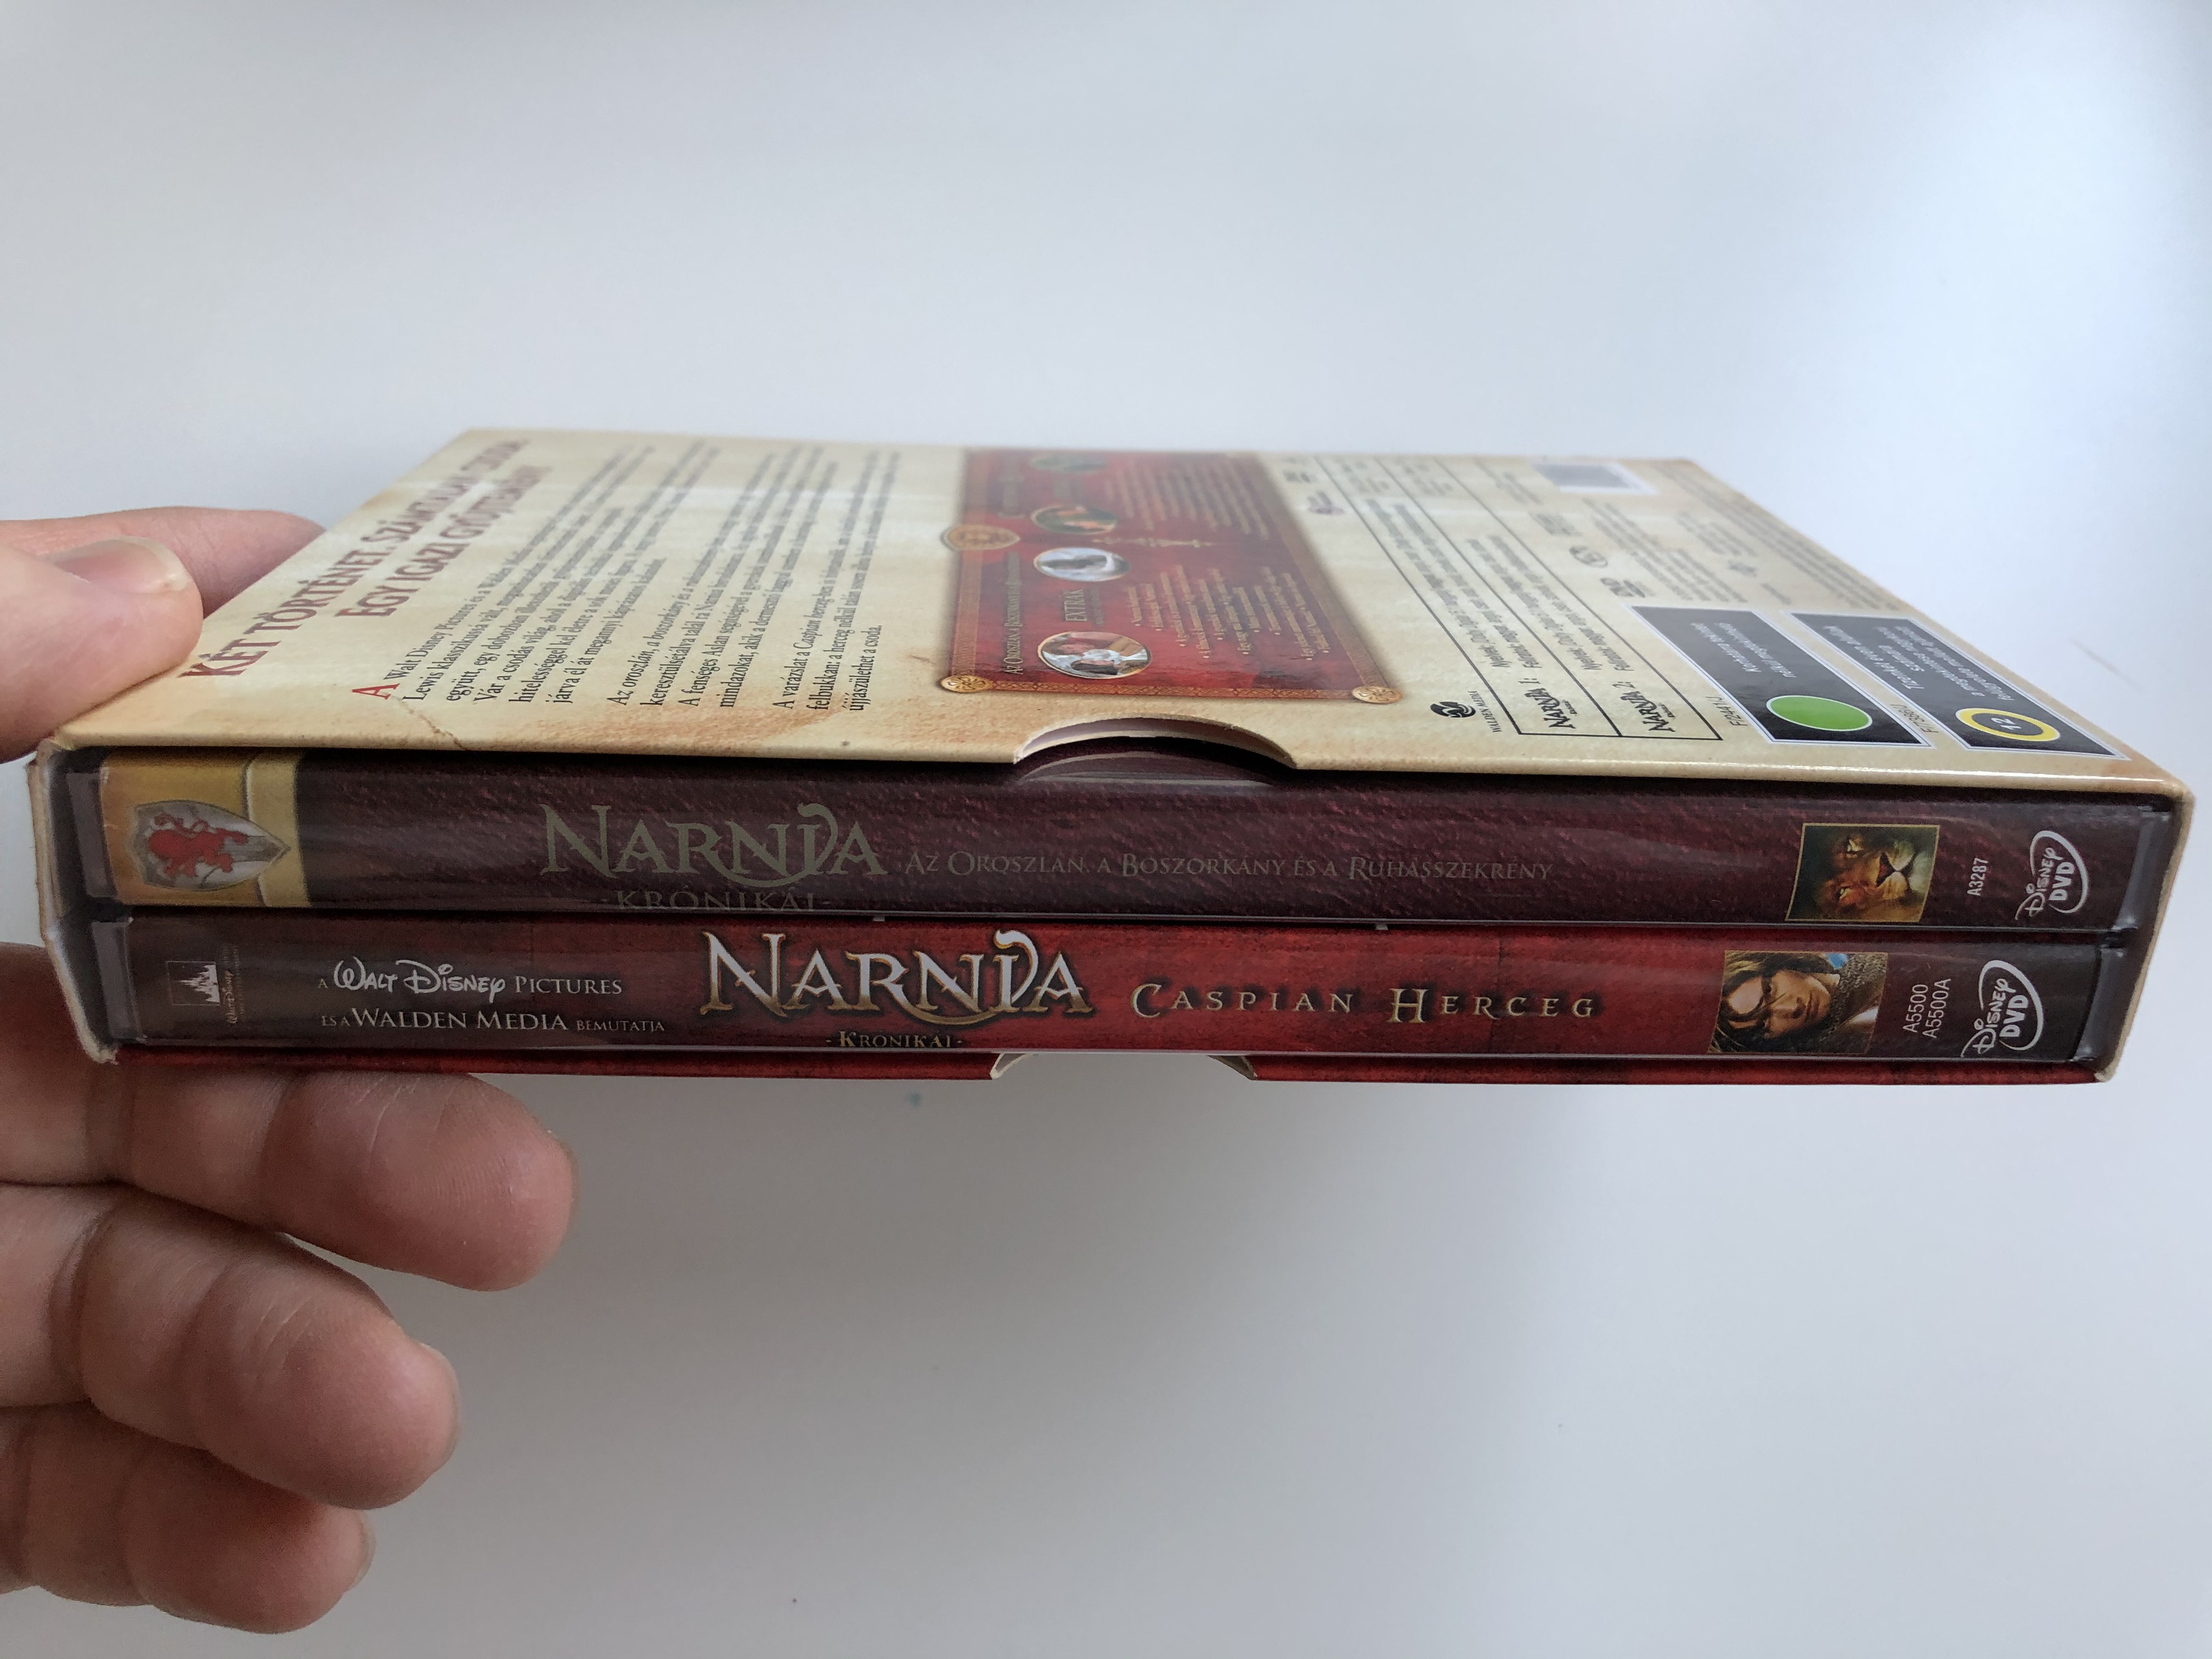 The Chronicles of Narnia: The Lion, the Witch and the Wardrobe - Prince  Caspian DVD SET Narnia krónikái - 2 film 4 lemezen / Directed by Andrew  Adamson / 2 films on